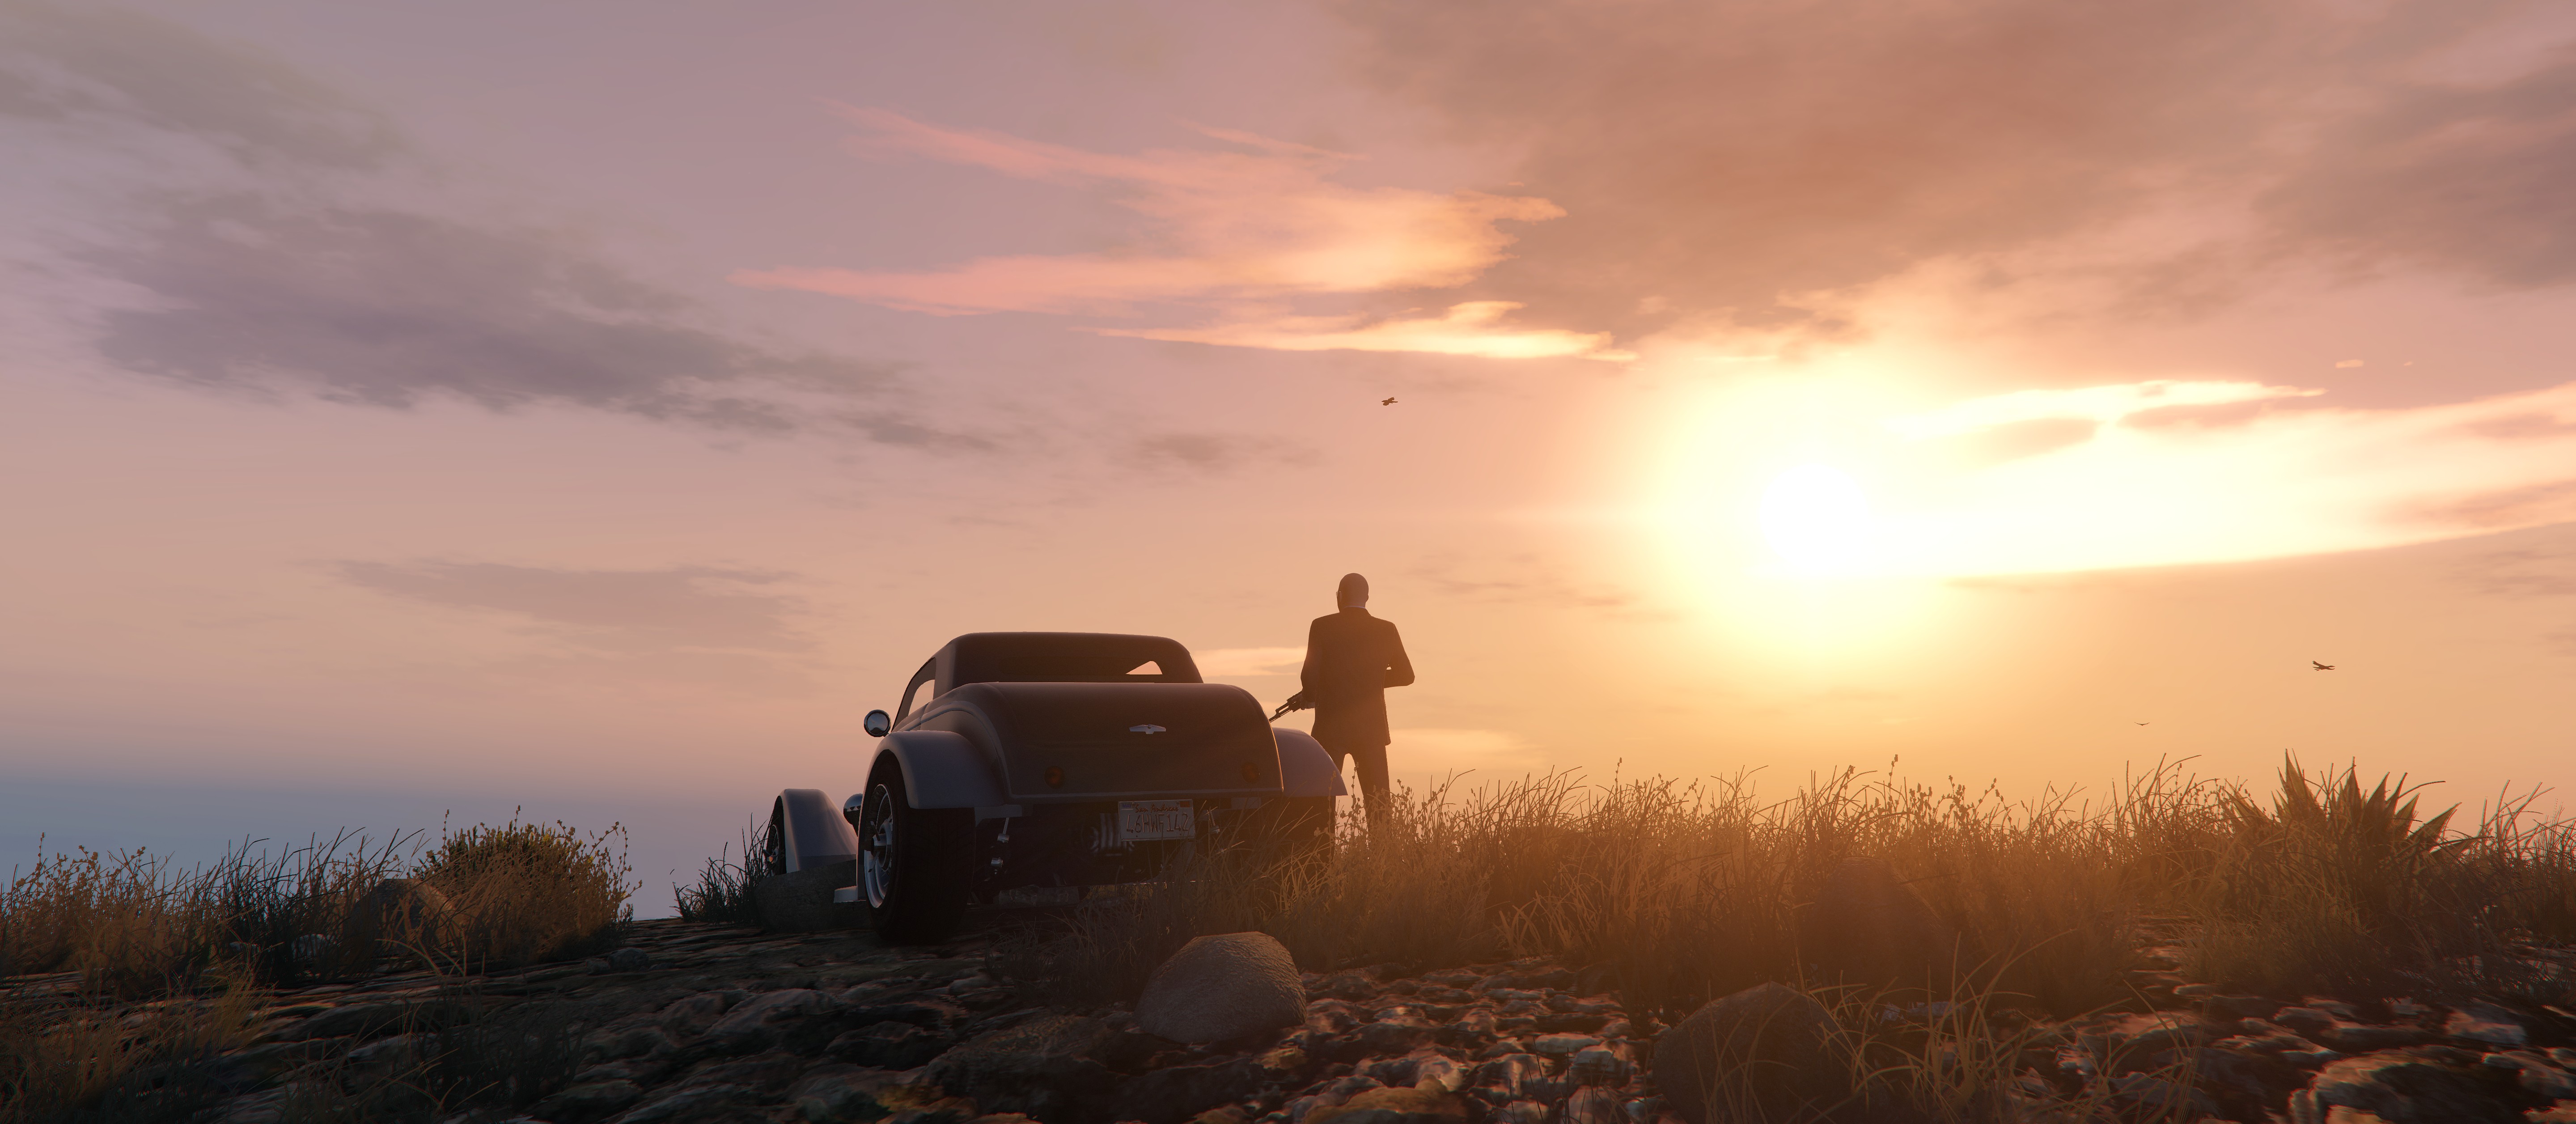 General 5760x2513 Grand Theft Auto V screen shot sunlight video games PC gaming car vehicle